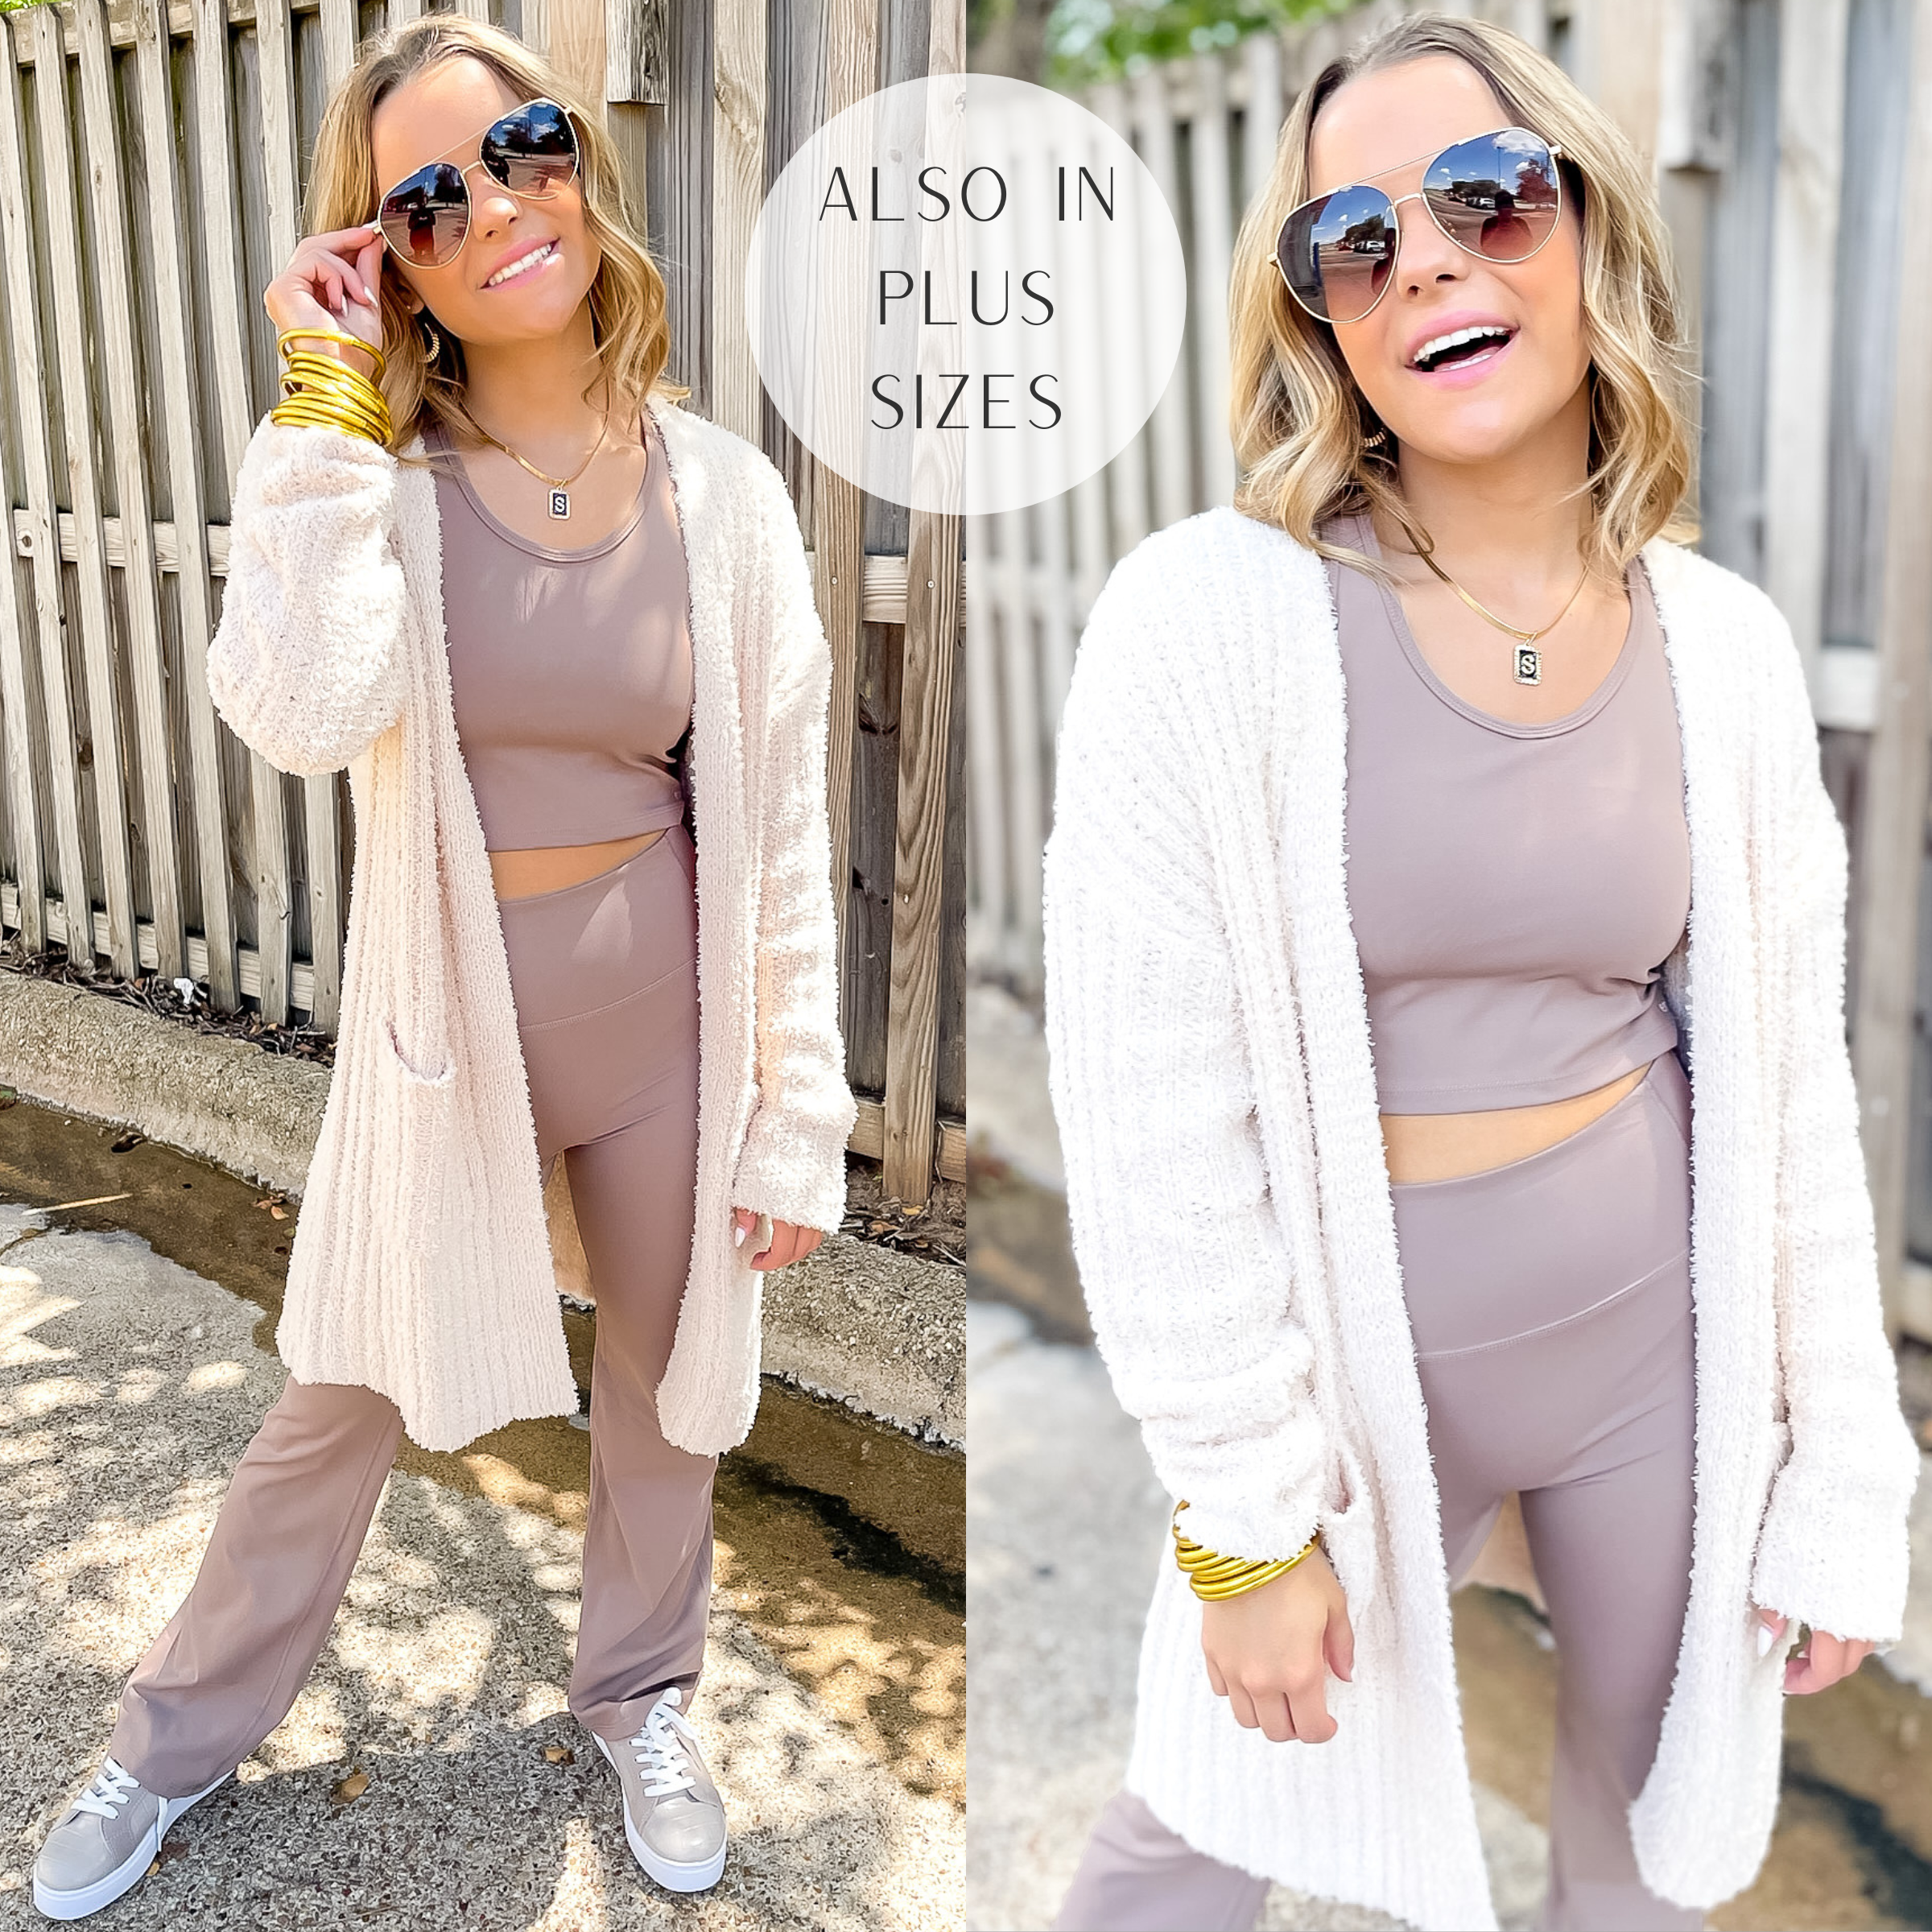 Model is wearing an ivory long sleeve cardigan over a taupe sports bra and taupe yoga pants. Model has it paired with grey sneakers, gold jewelry, and sunglasses.